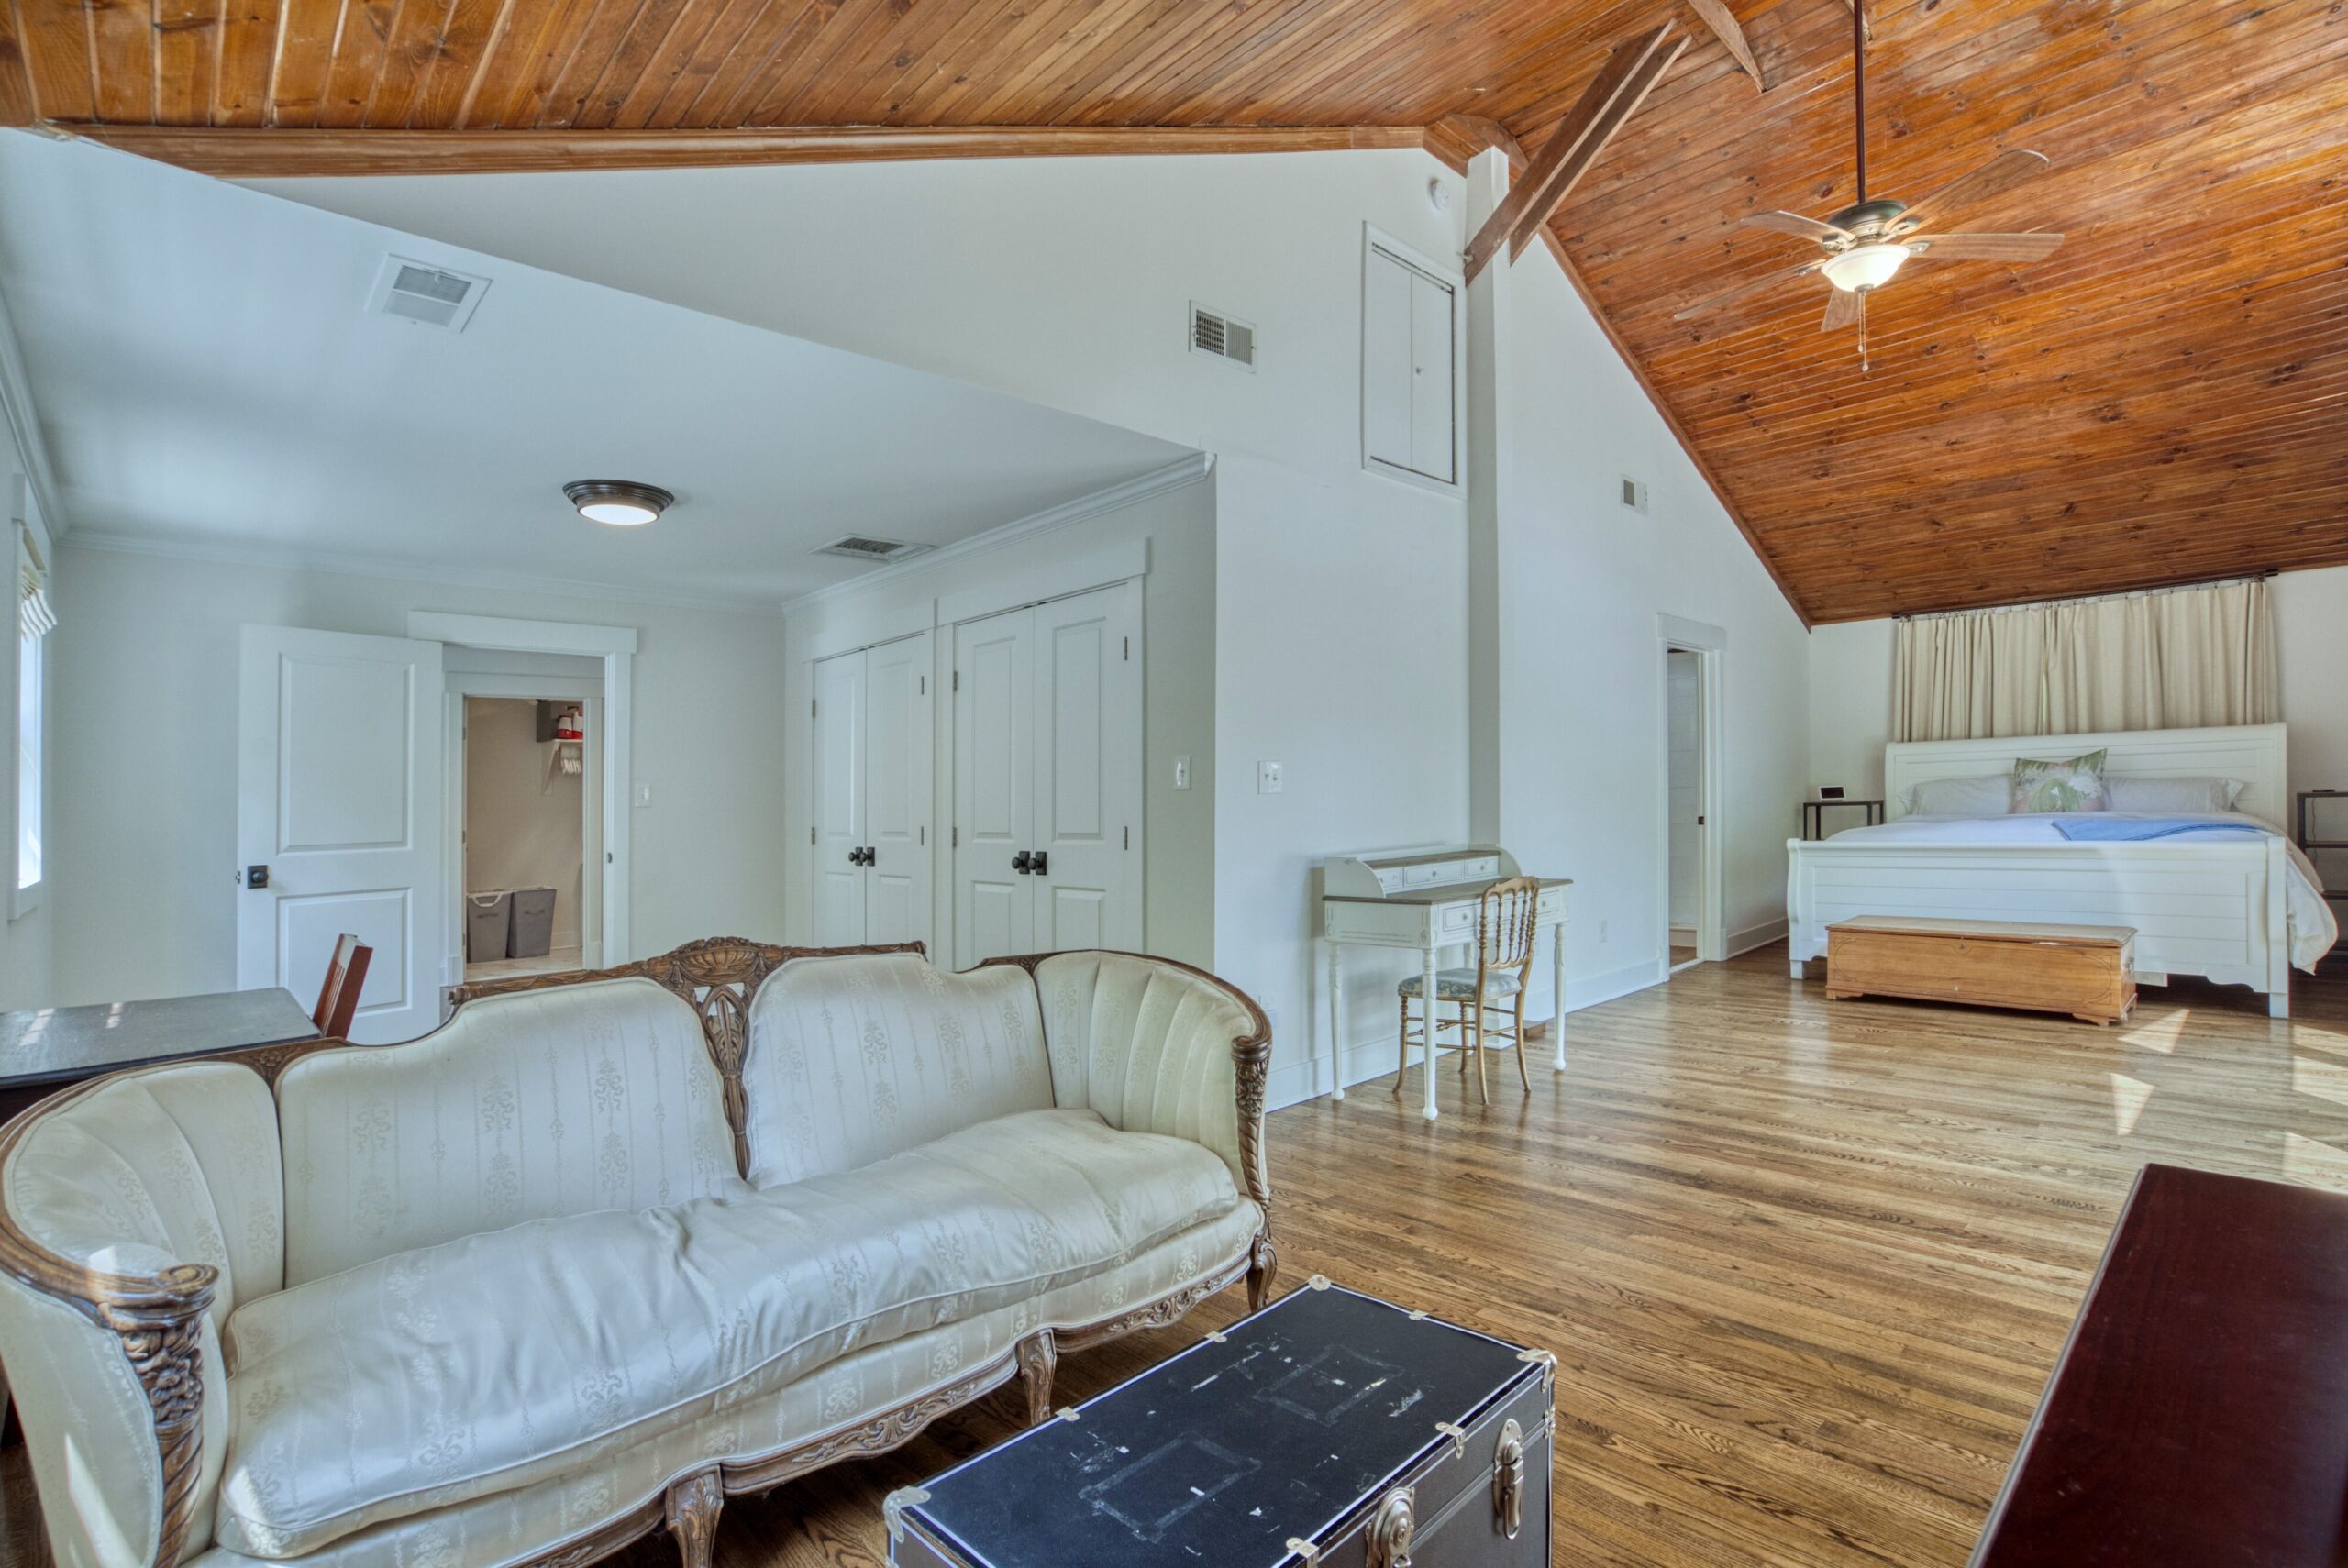 Professional interior photo of 209 Norwood Road, Annapolis, MD - showing the sitting area of the primary suite with the bed space in the back and vaulted hardwood ceiling